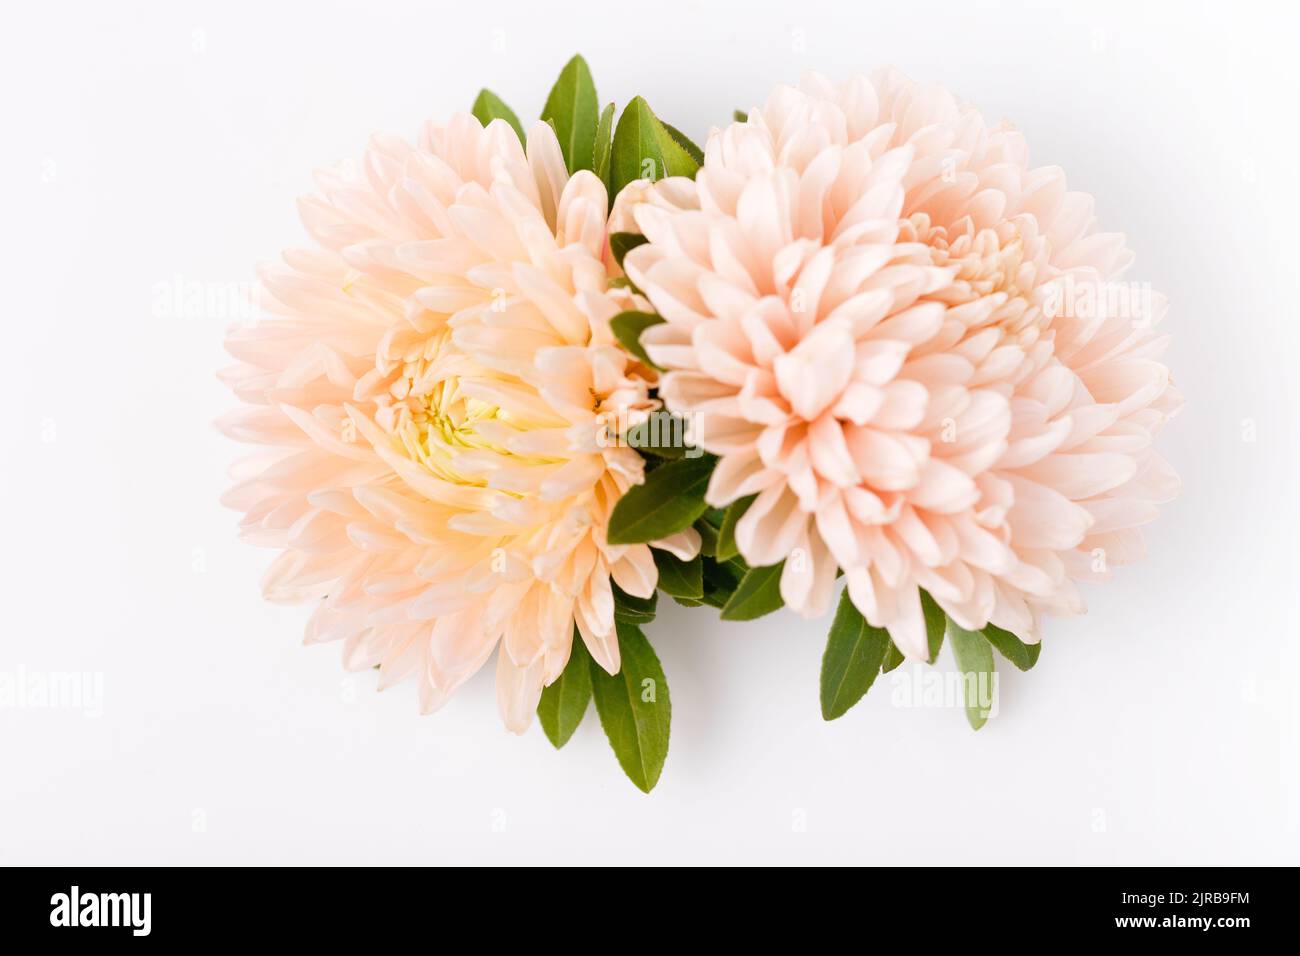 Aster flower coral color closeup isolated on white background. Stock Photo